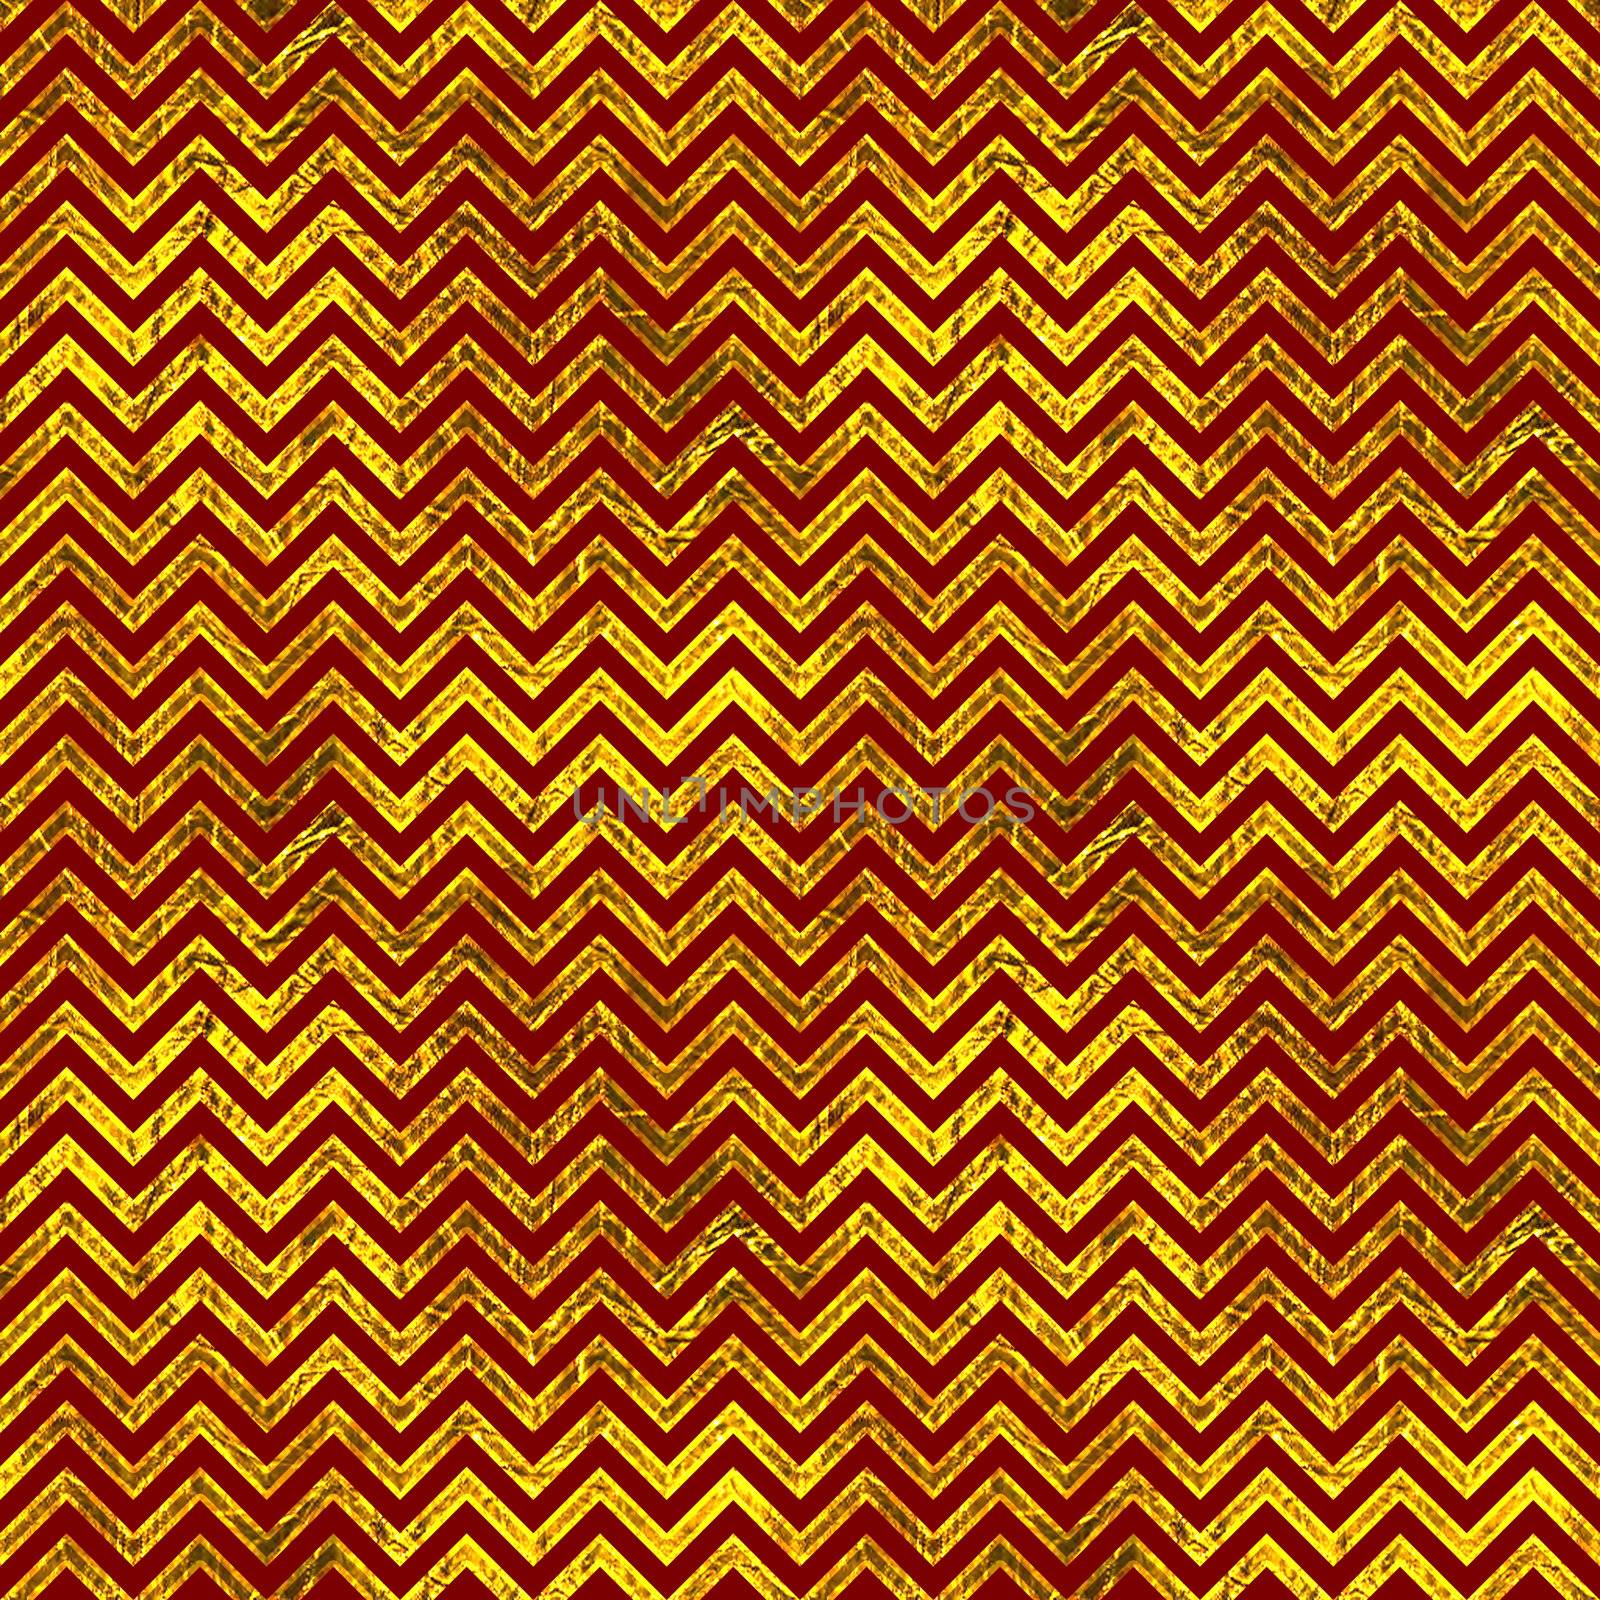 Seamless chevron pattern in deep red and bright gold